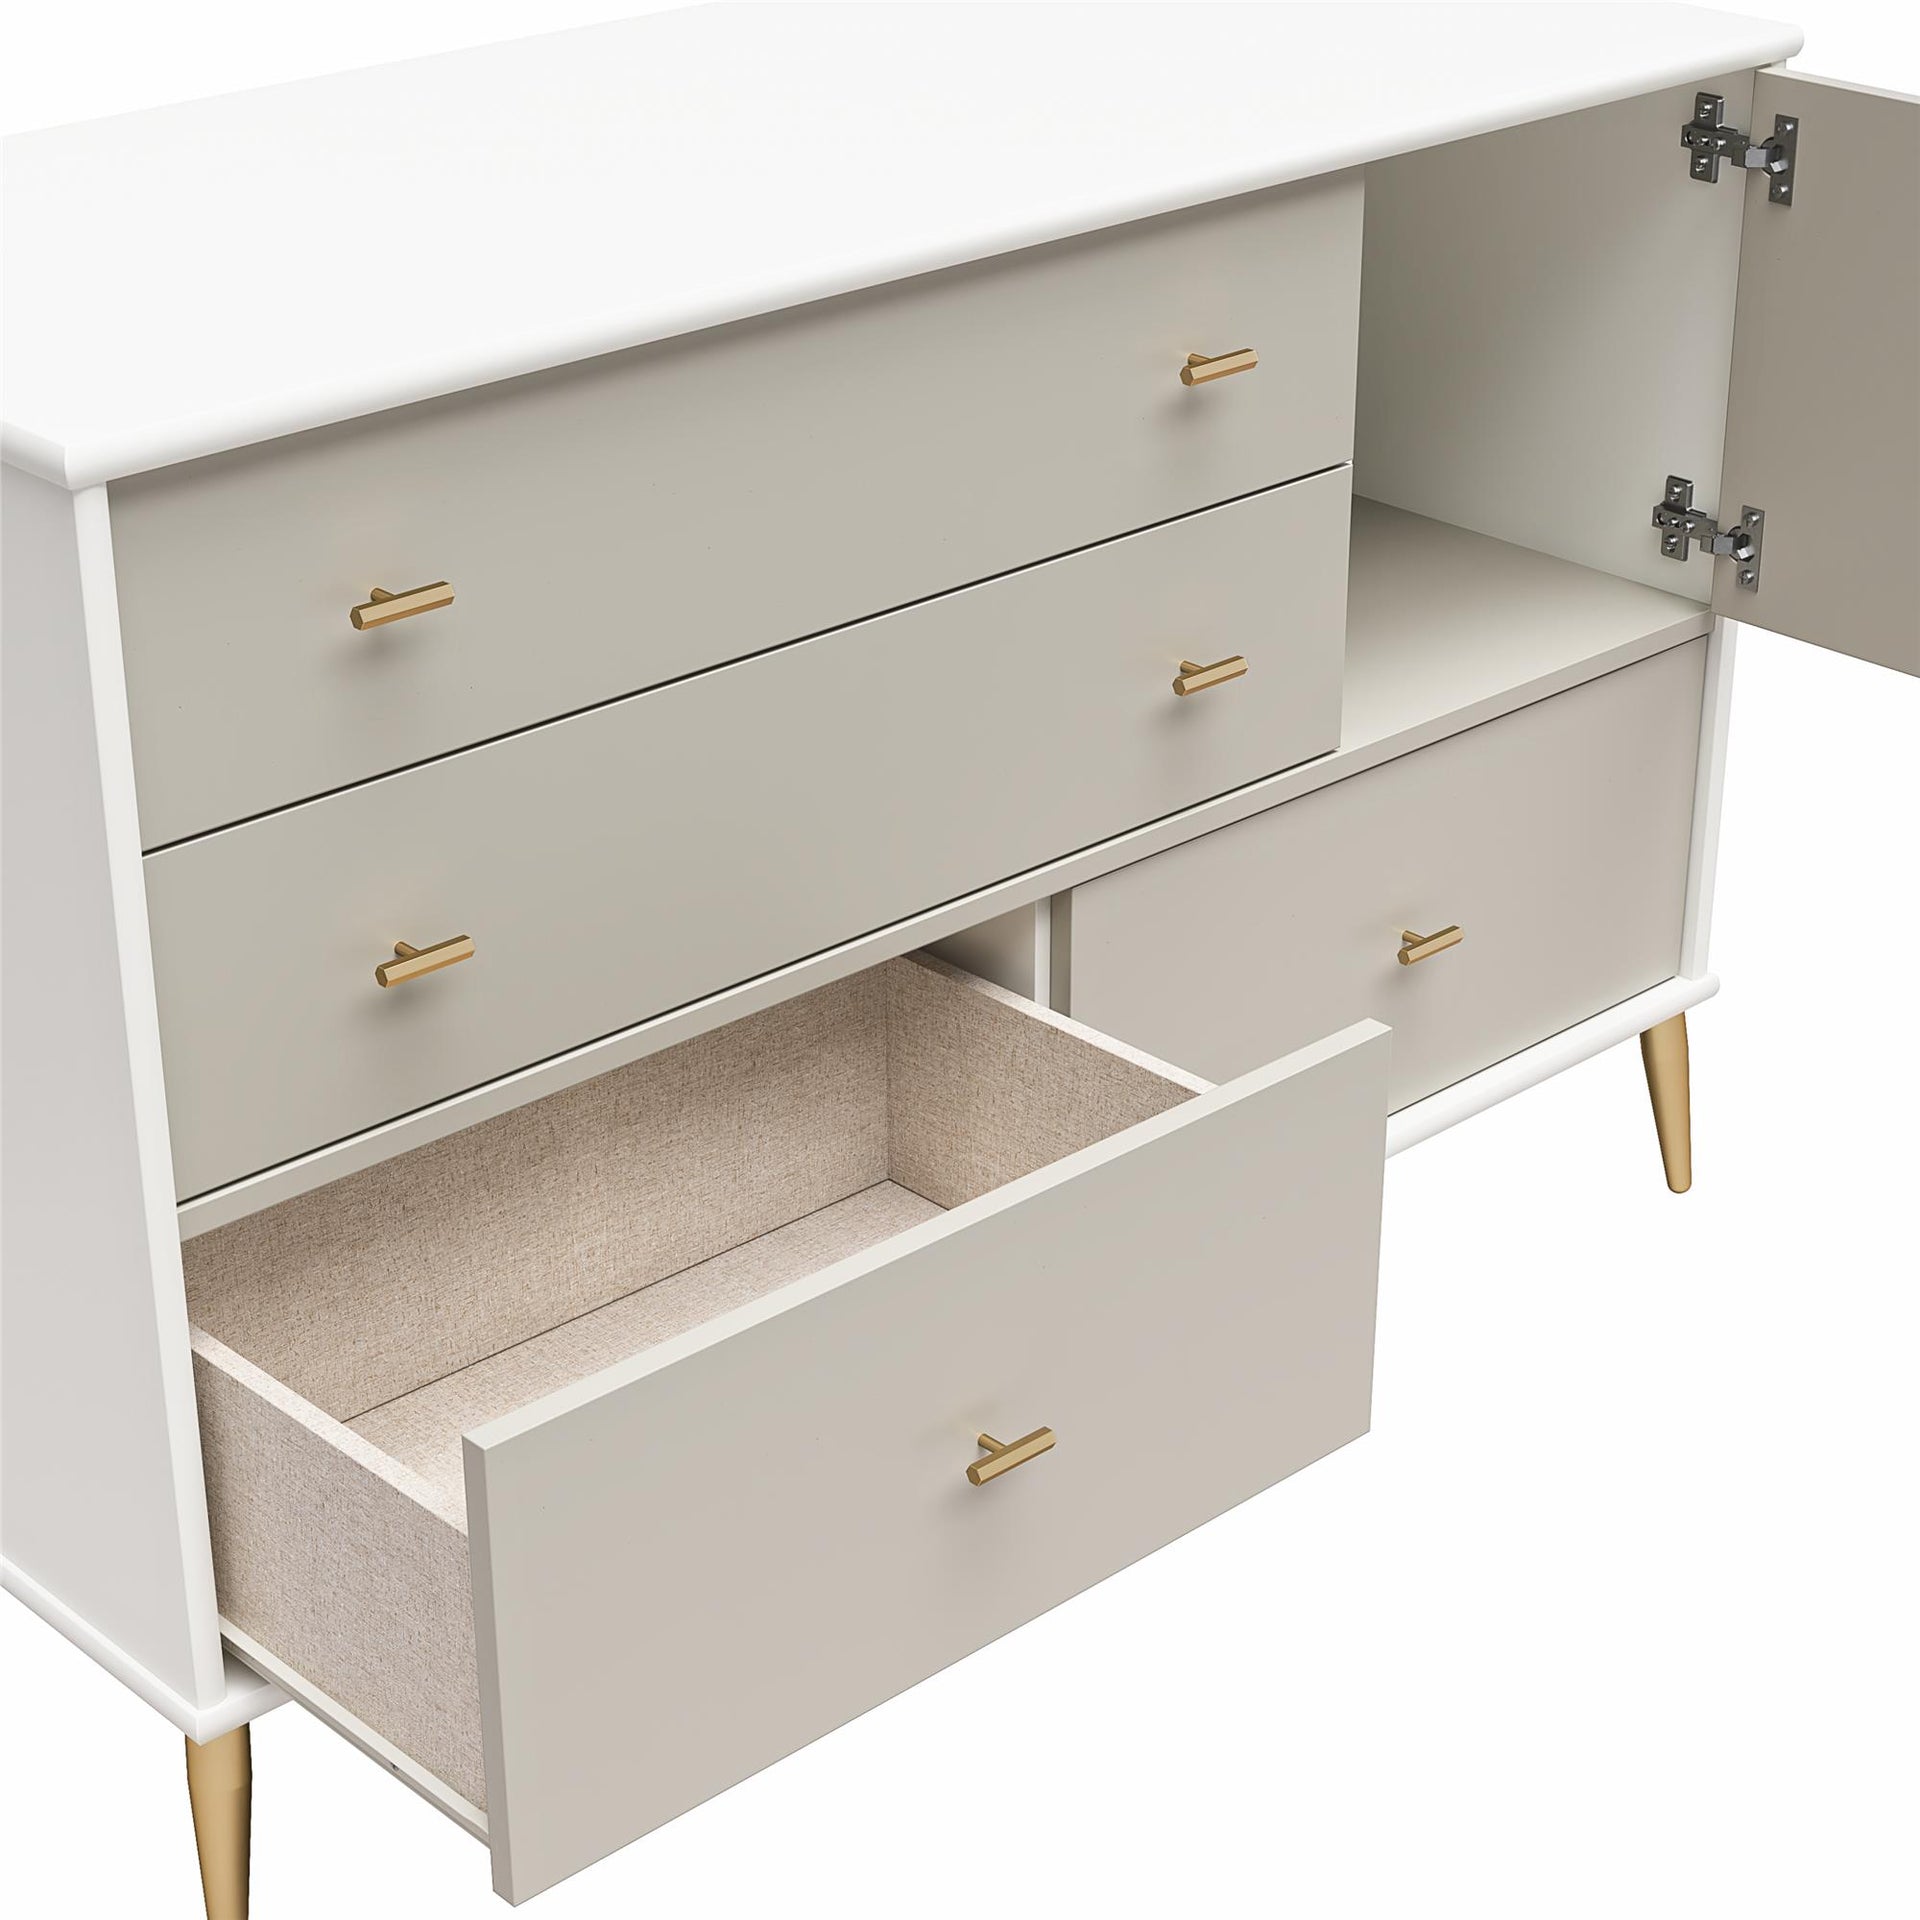 Valentina Asymmetrical 4 Drawer / 1 Door Convertible Dresser, White and Taupe - White / Grey